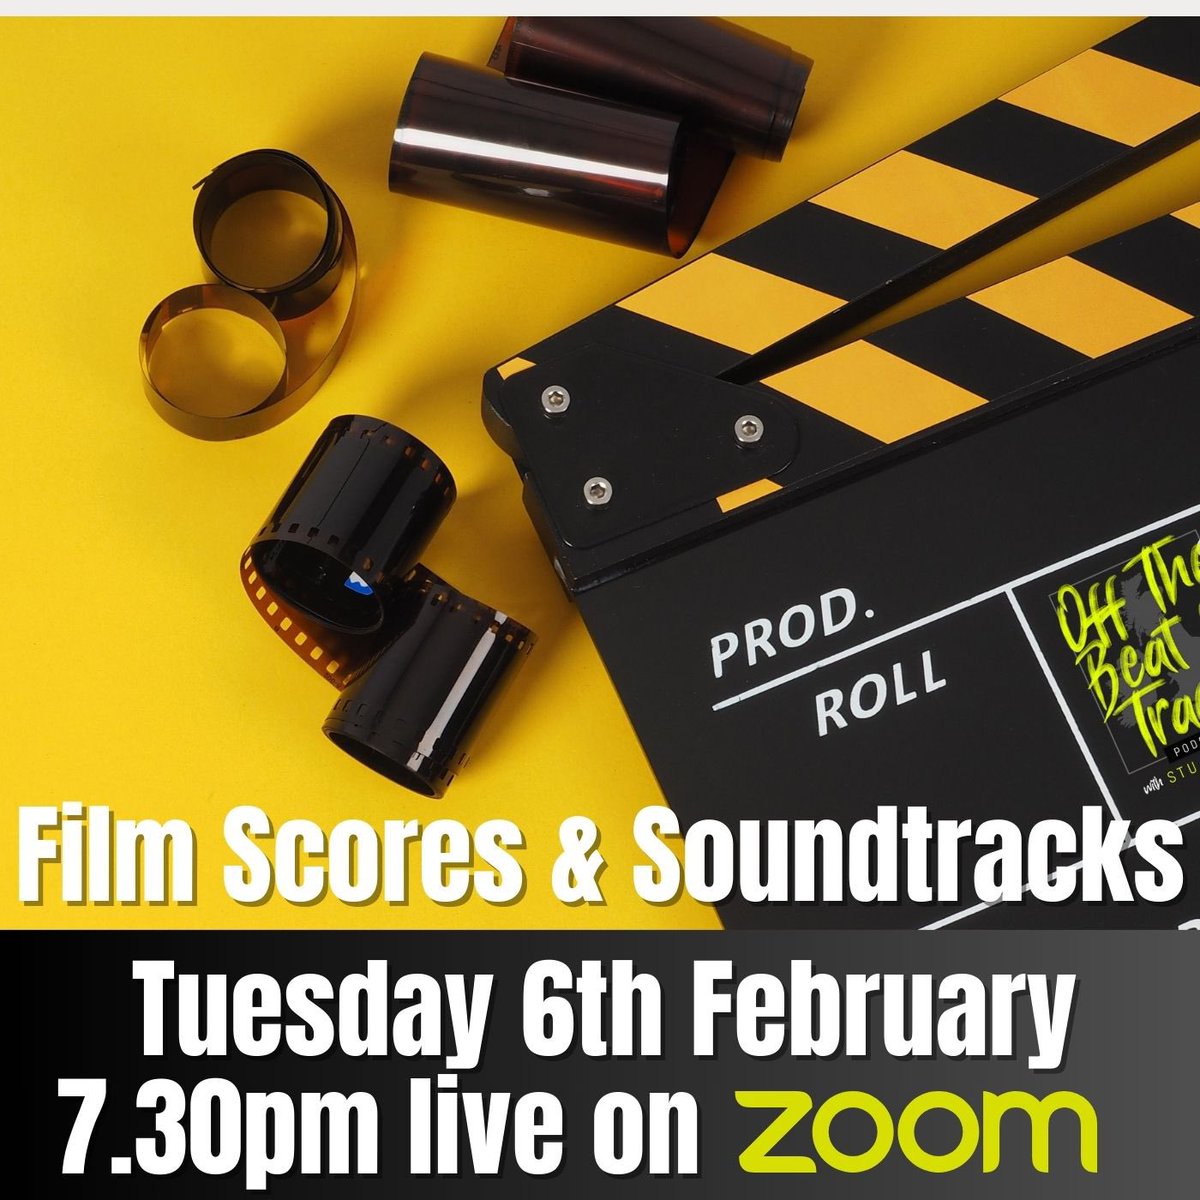 TONIGHT!! I would love to see you pop up on the @beatandtrackpod zoom live show tonight, we will be talking about some of the greatest film soundtracks and scores Tickets are £1 and are available at Patreon.com/offthebeatandt…